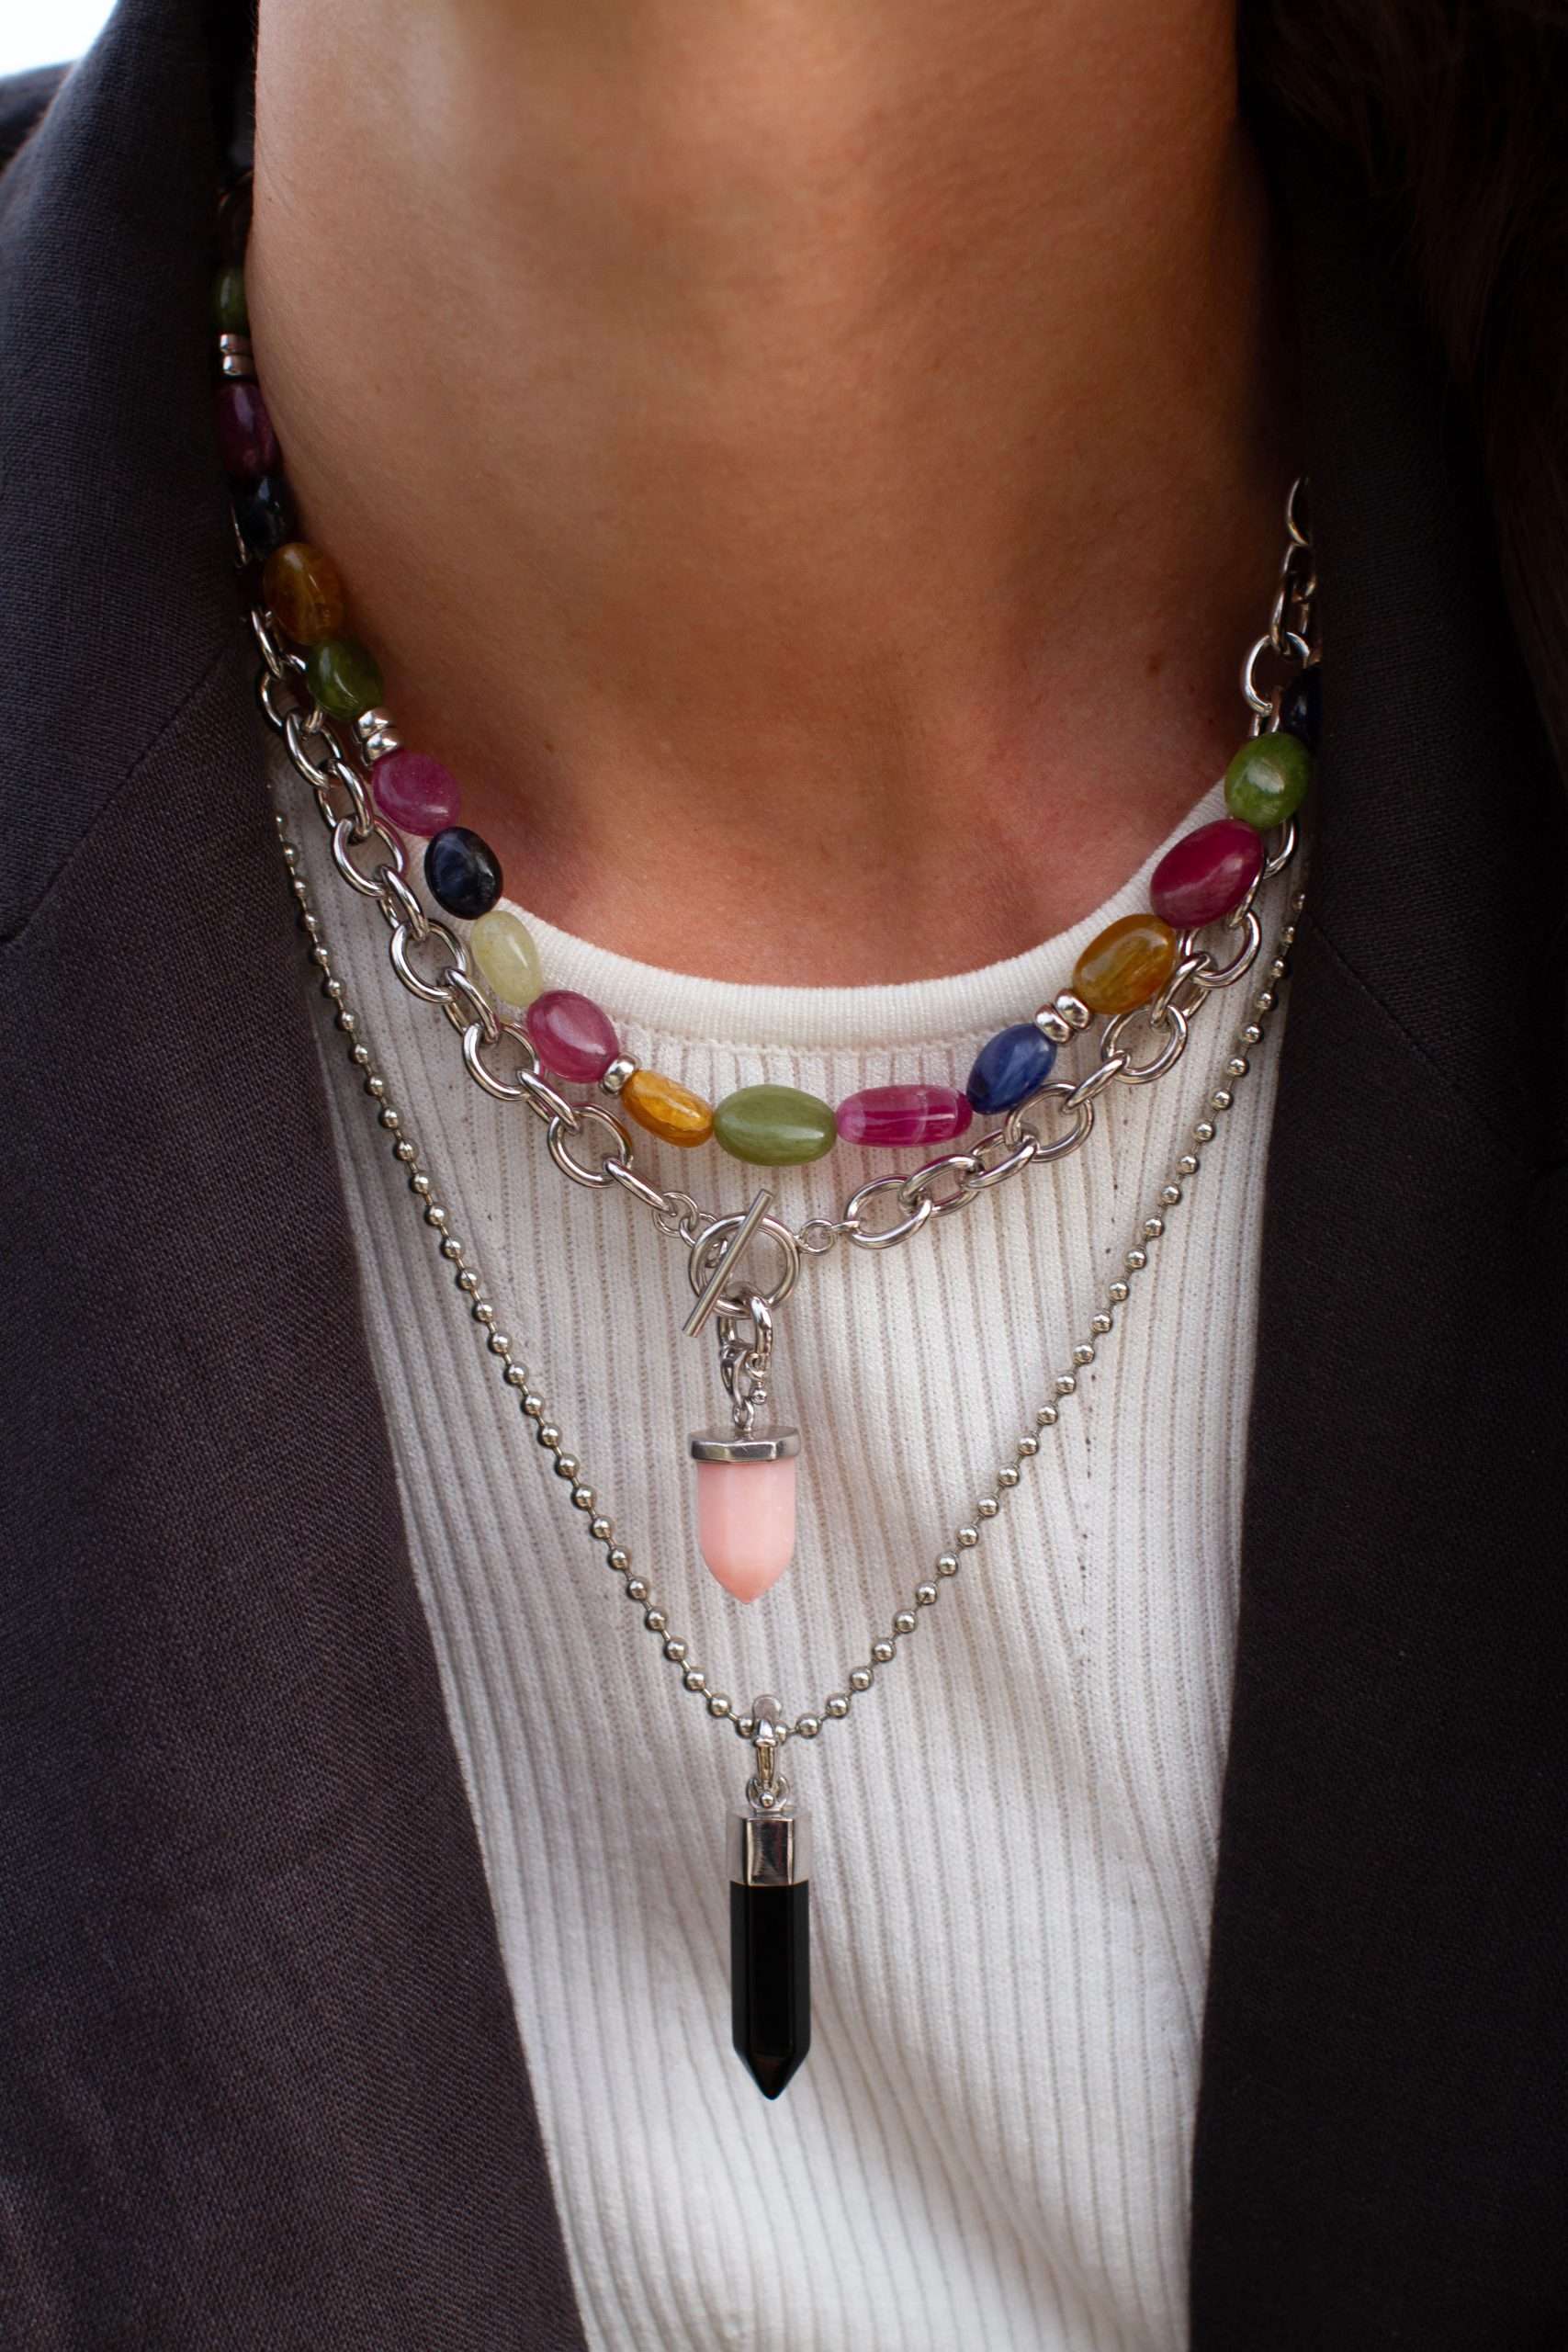 This bead necklace makes wearing sapphires simple and carefree